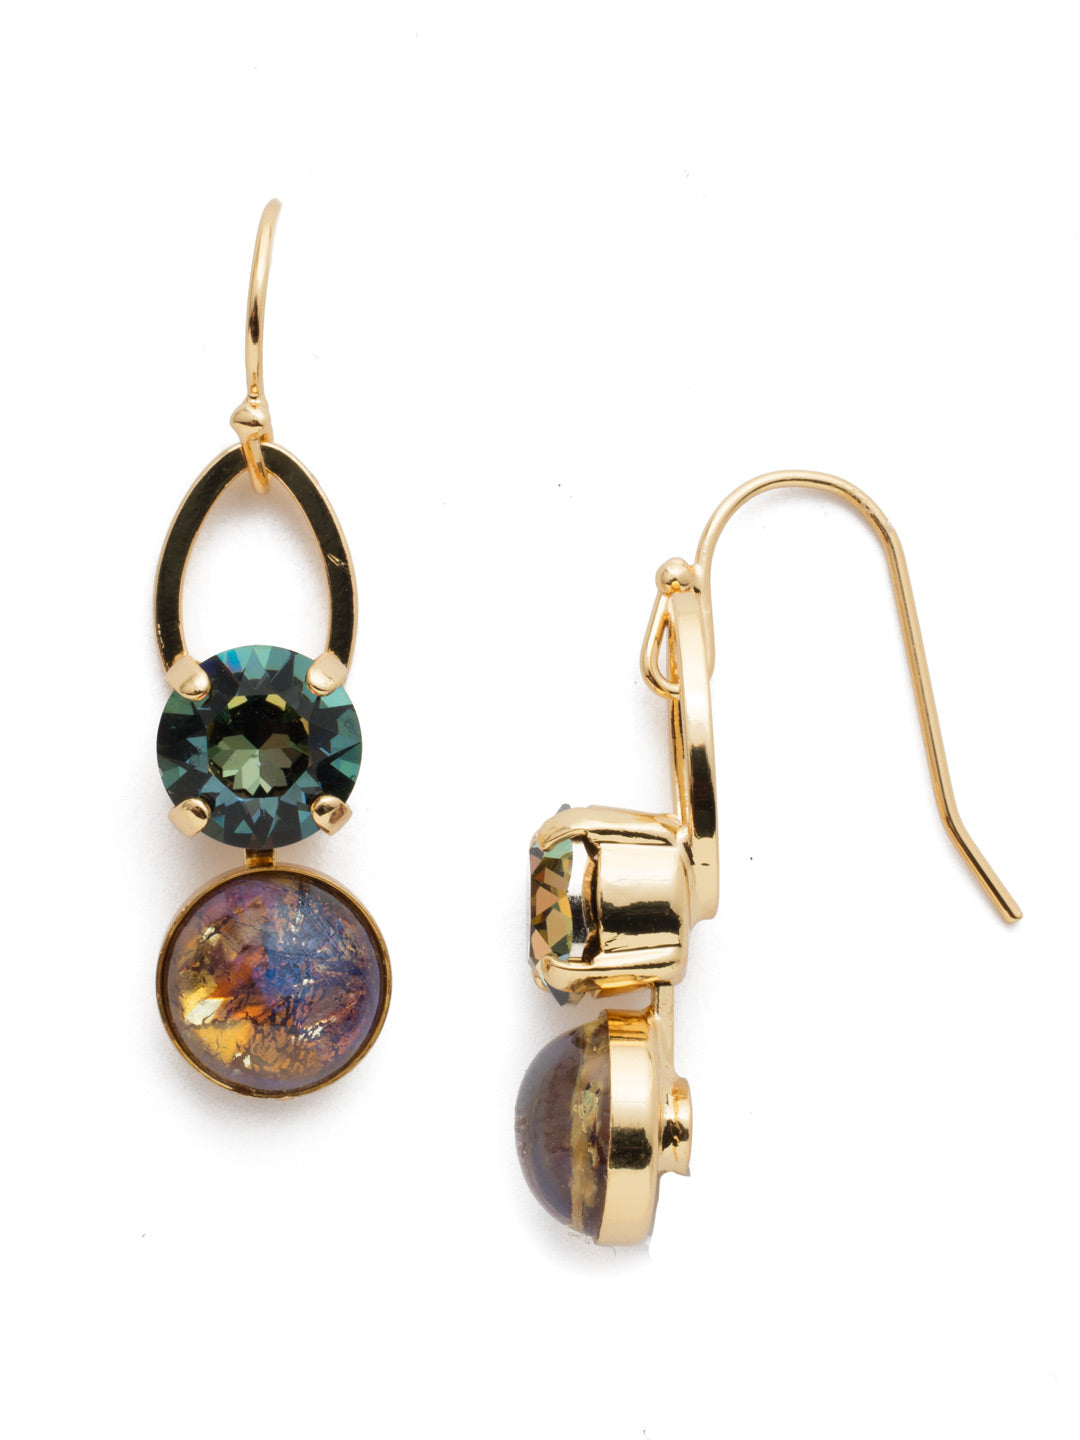 Astro Dangle Earrings - EET4BGCSM - Our Astro Dangle Earrings shine like a moonlit sky. Delicate metal gives way to sparkling and opaque crystal stones. From Sorrelli's Cashmere collection in our Bright Gold-tone finish.